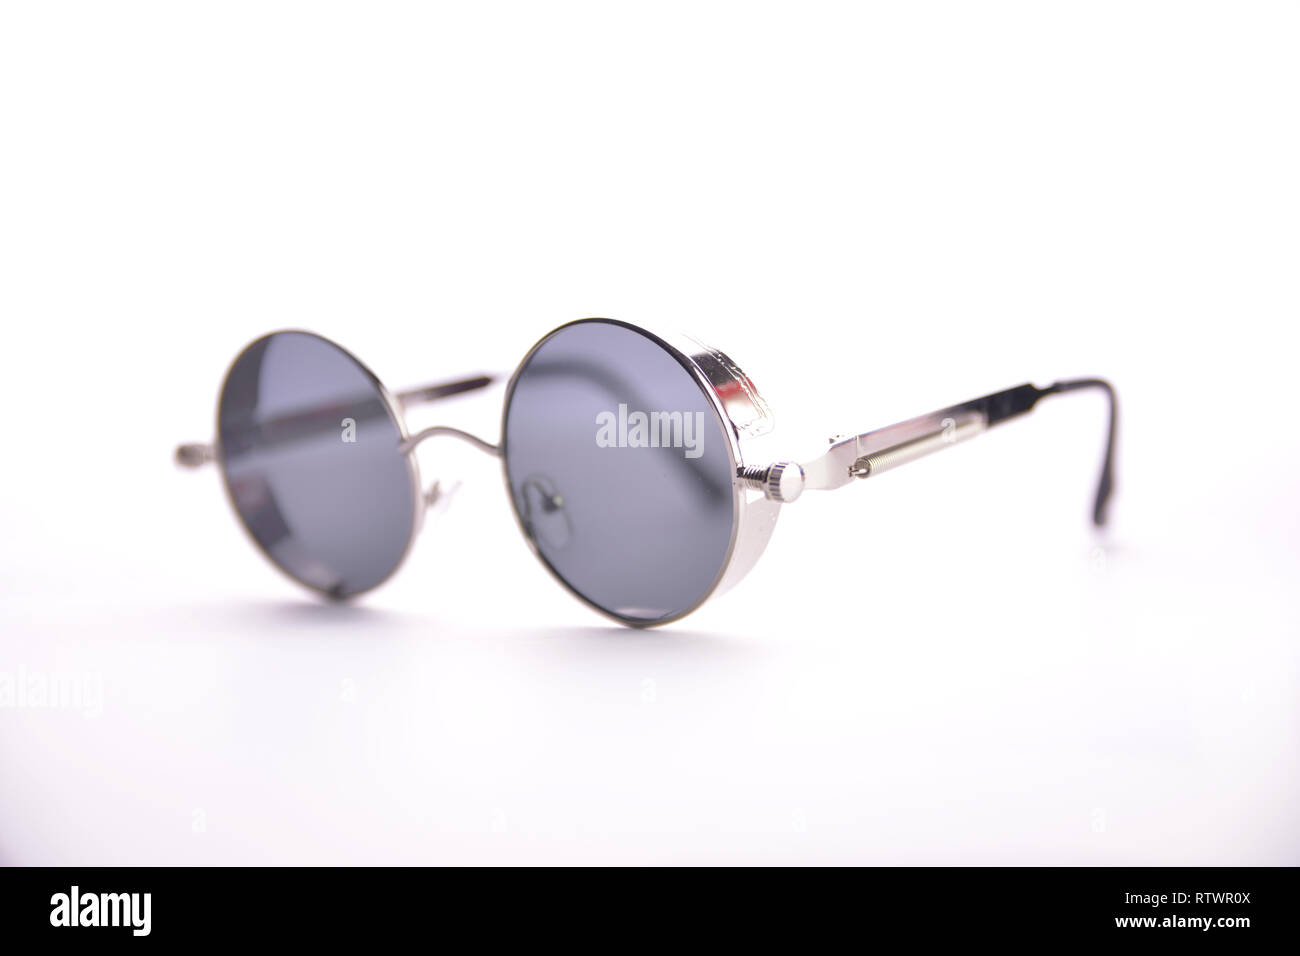 fashionable glasses in the style of steampunk on a white background. Stock Photo